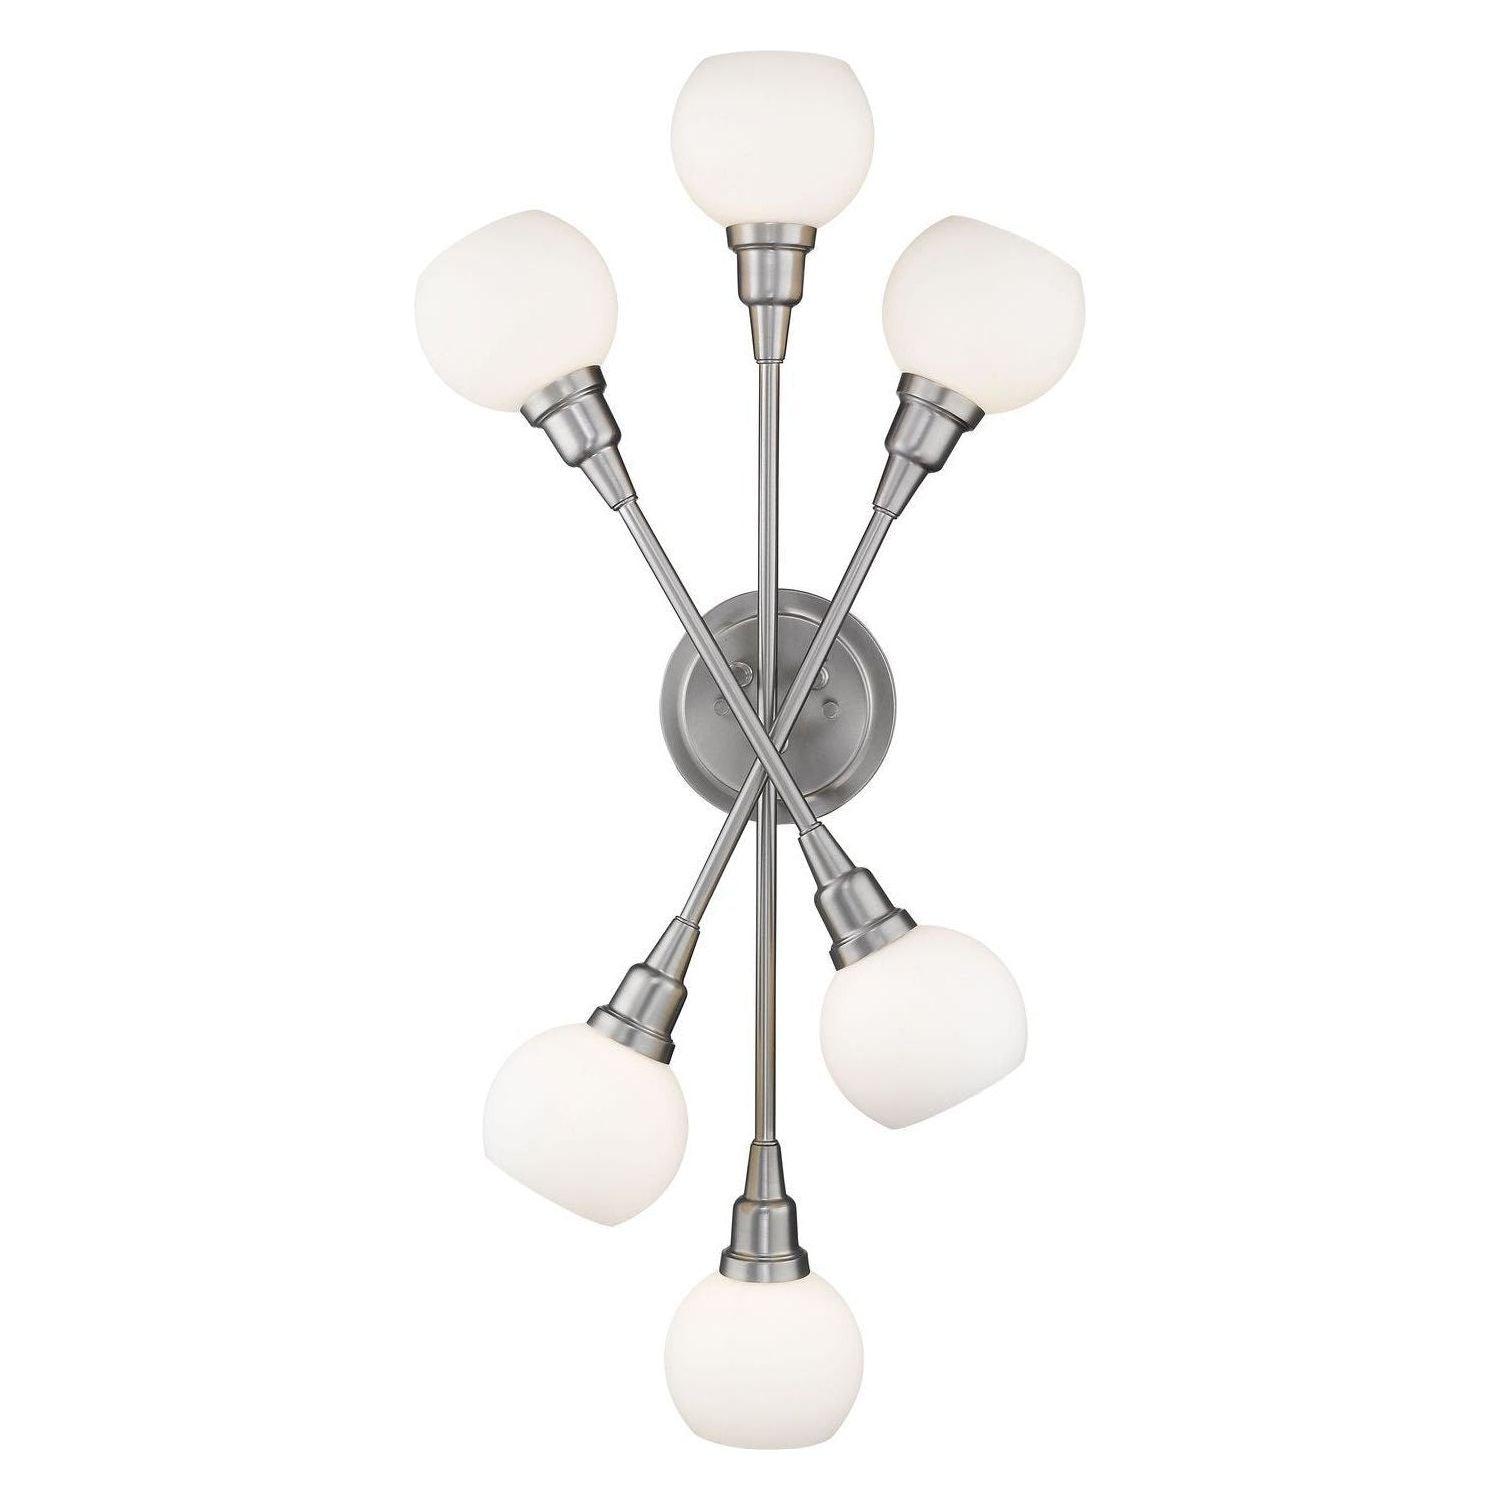 Z-Lite - Tian Wall Sconce - Lights Canada